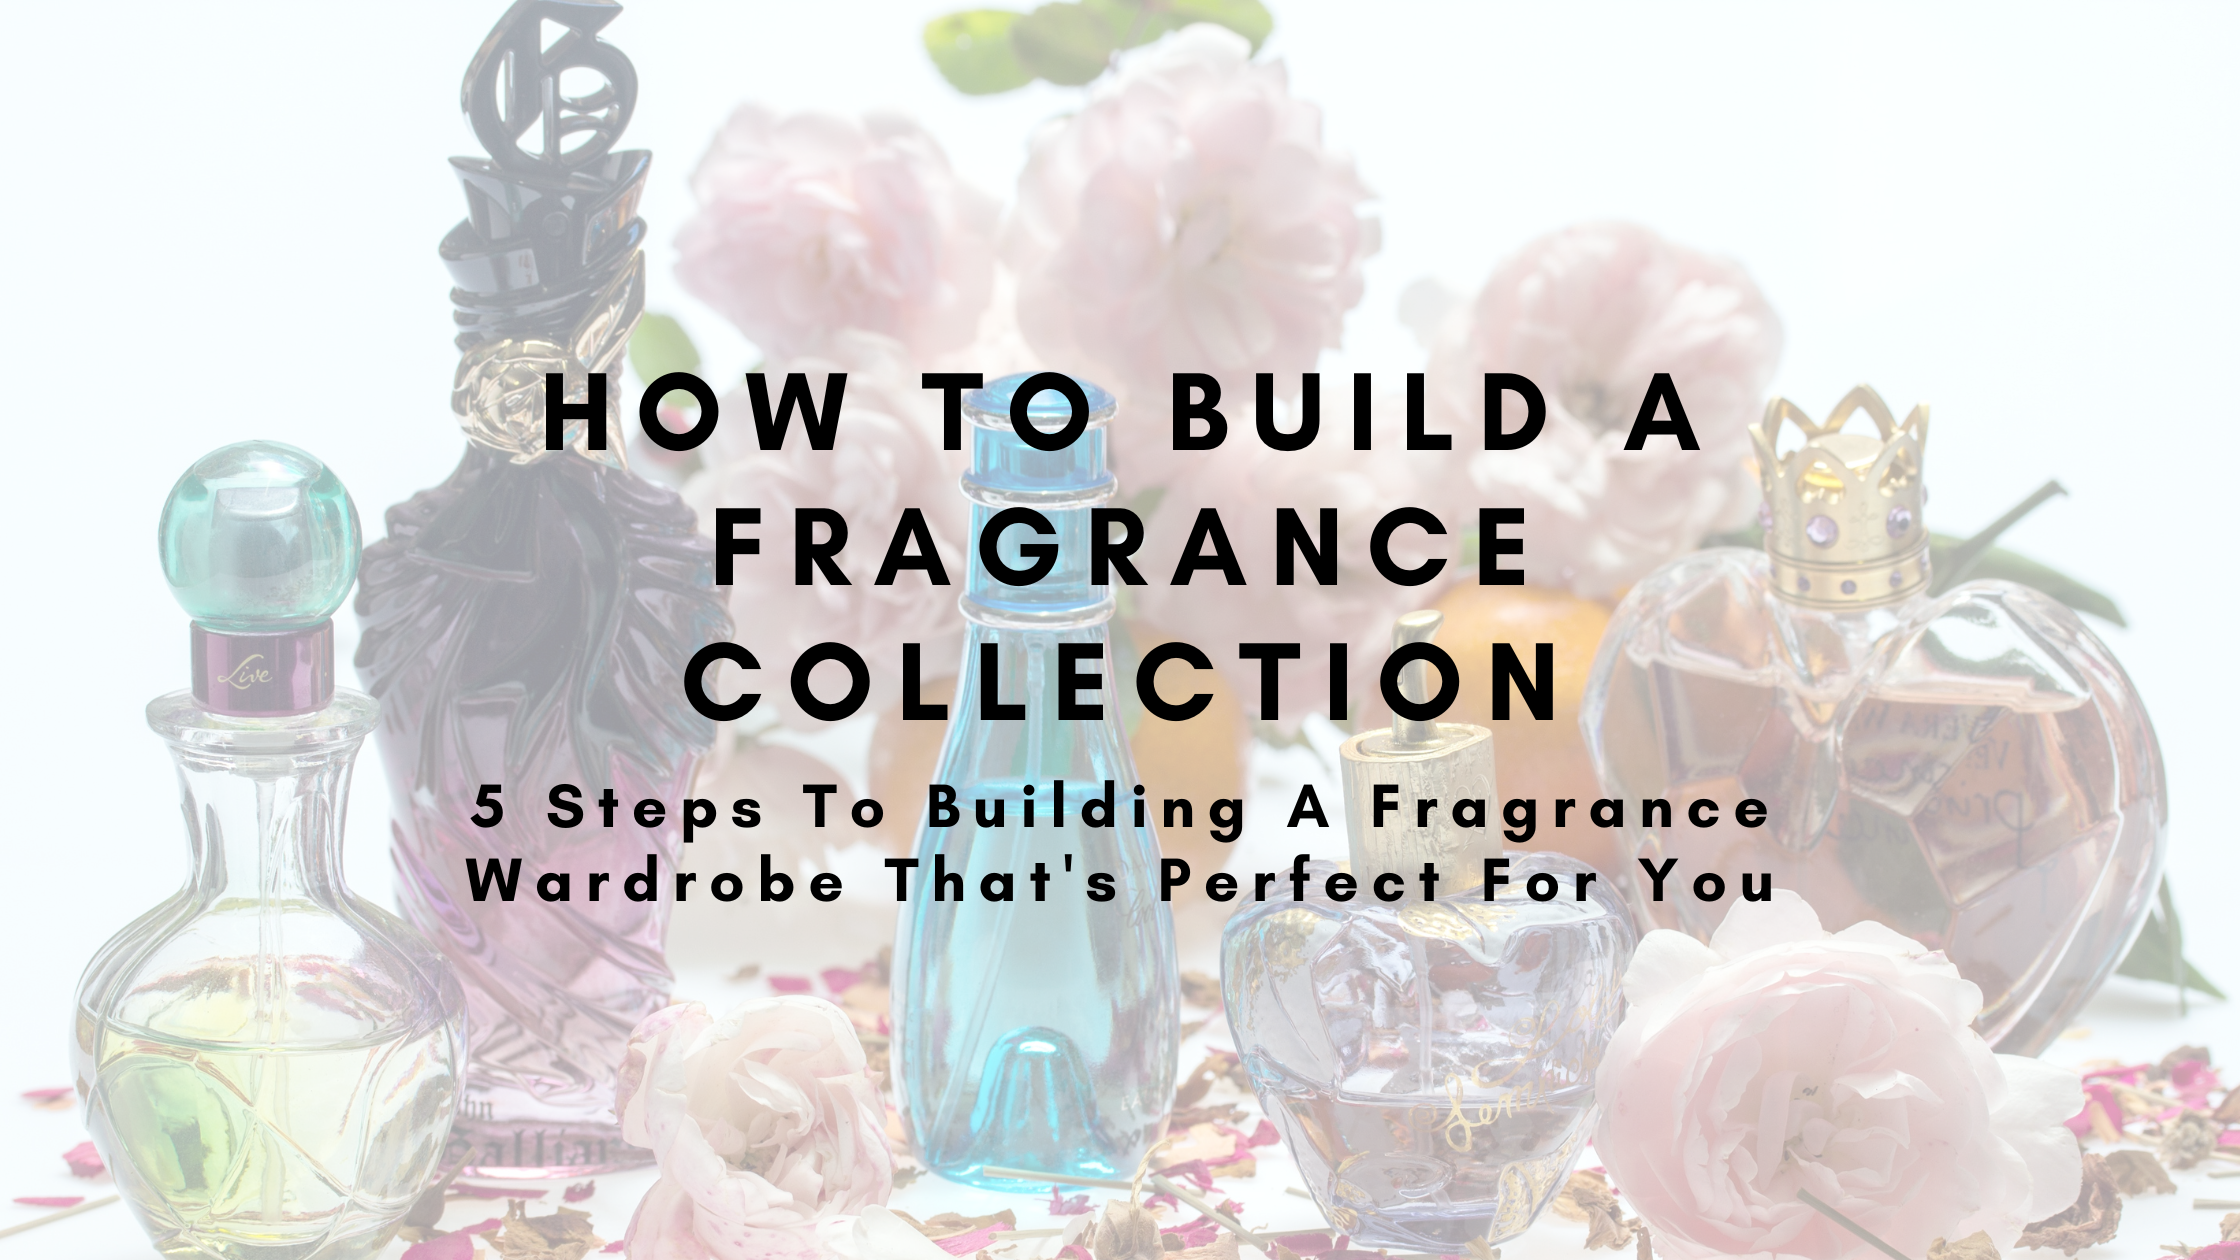 How To Build a Fragrance Collection: 5 Steps To Building A Fragrance Wardrobe That's Perfect For You